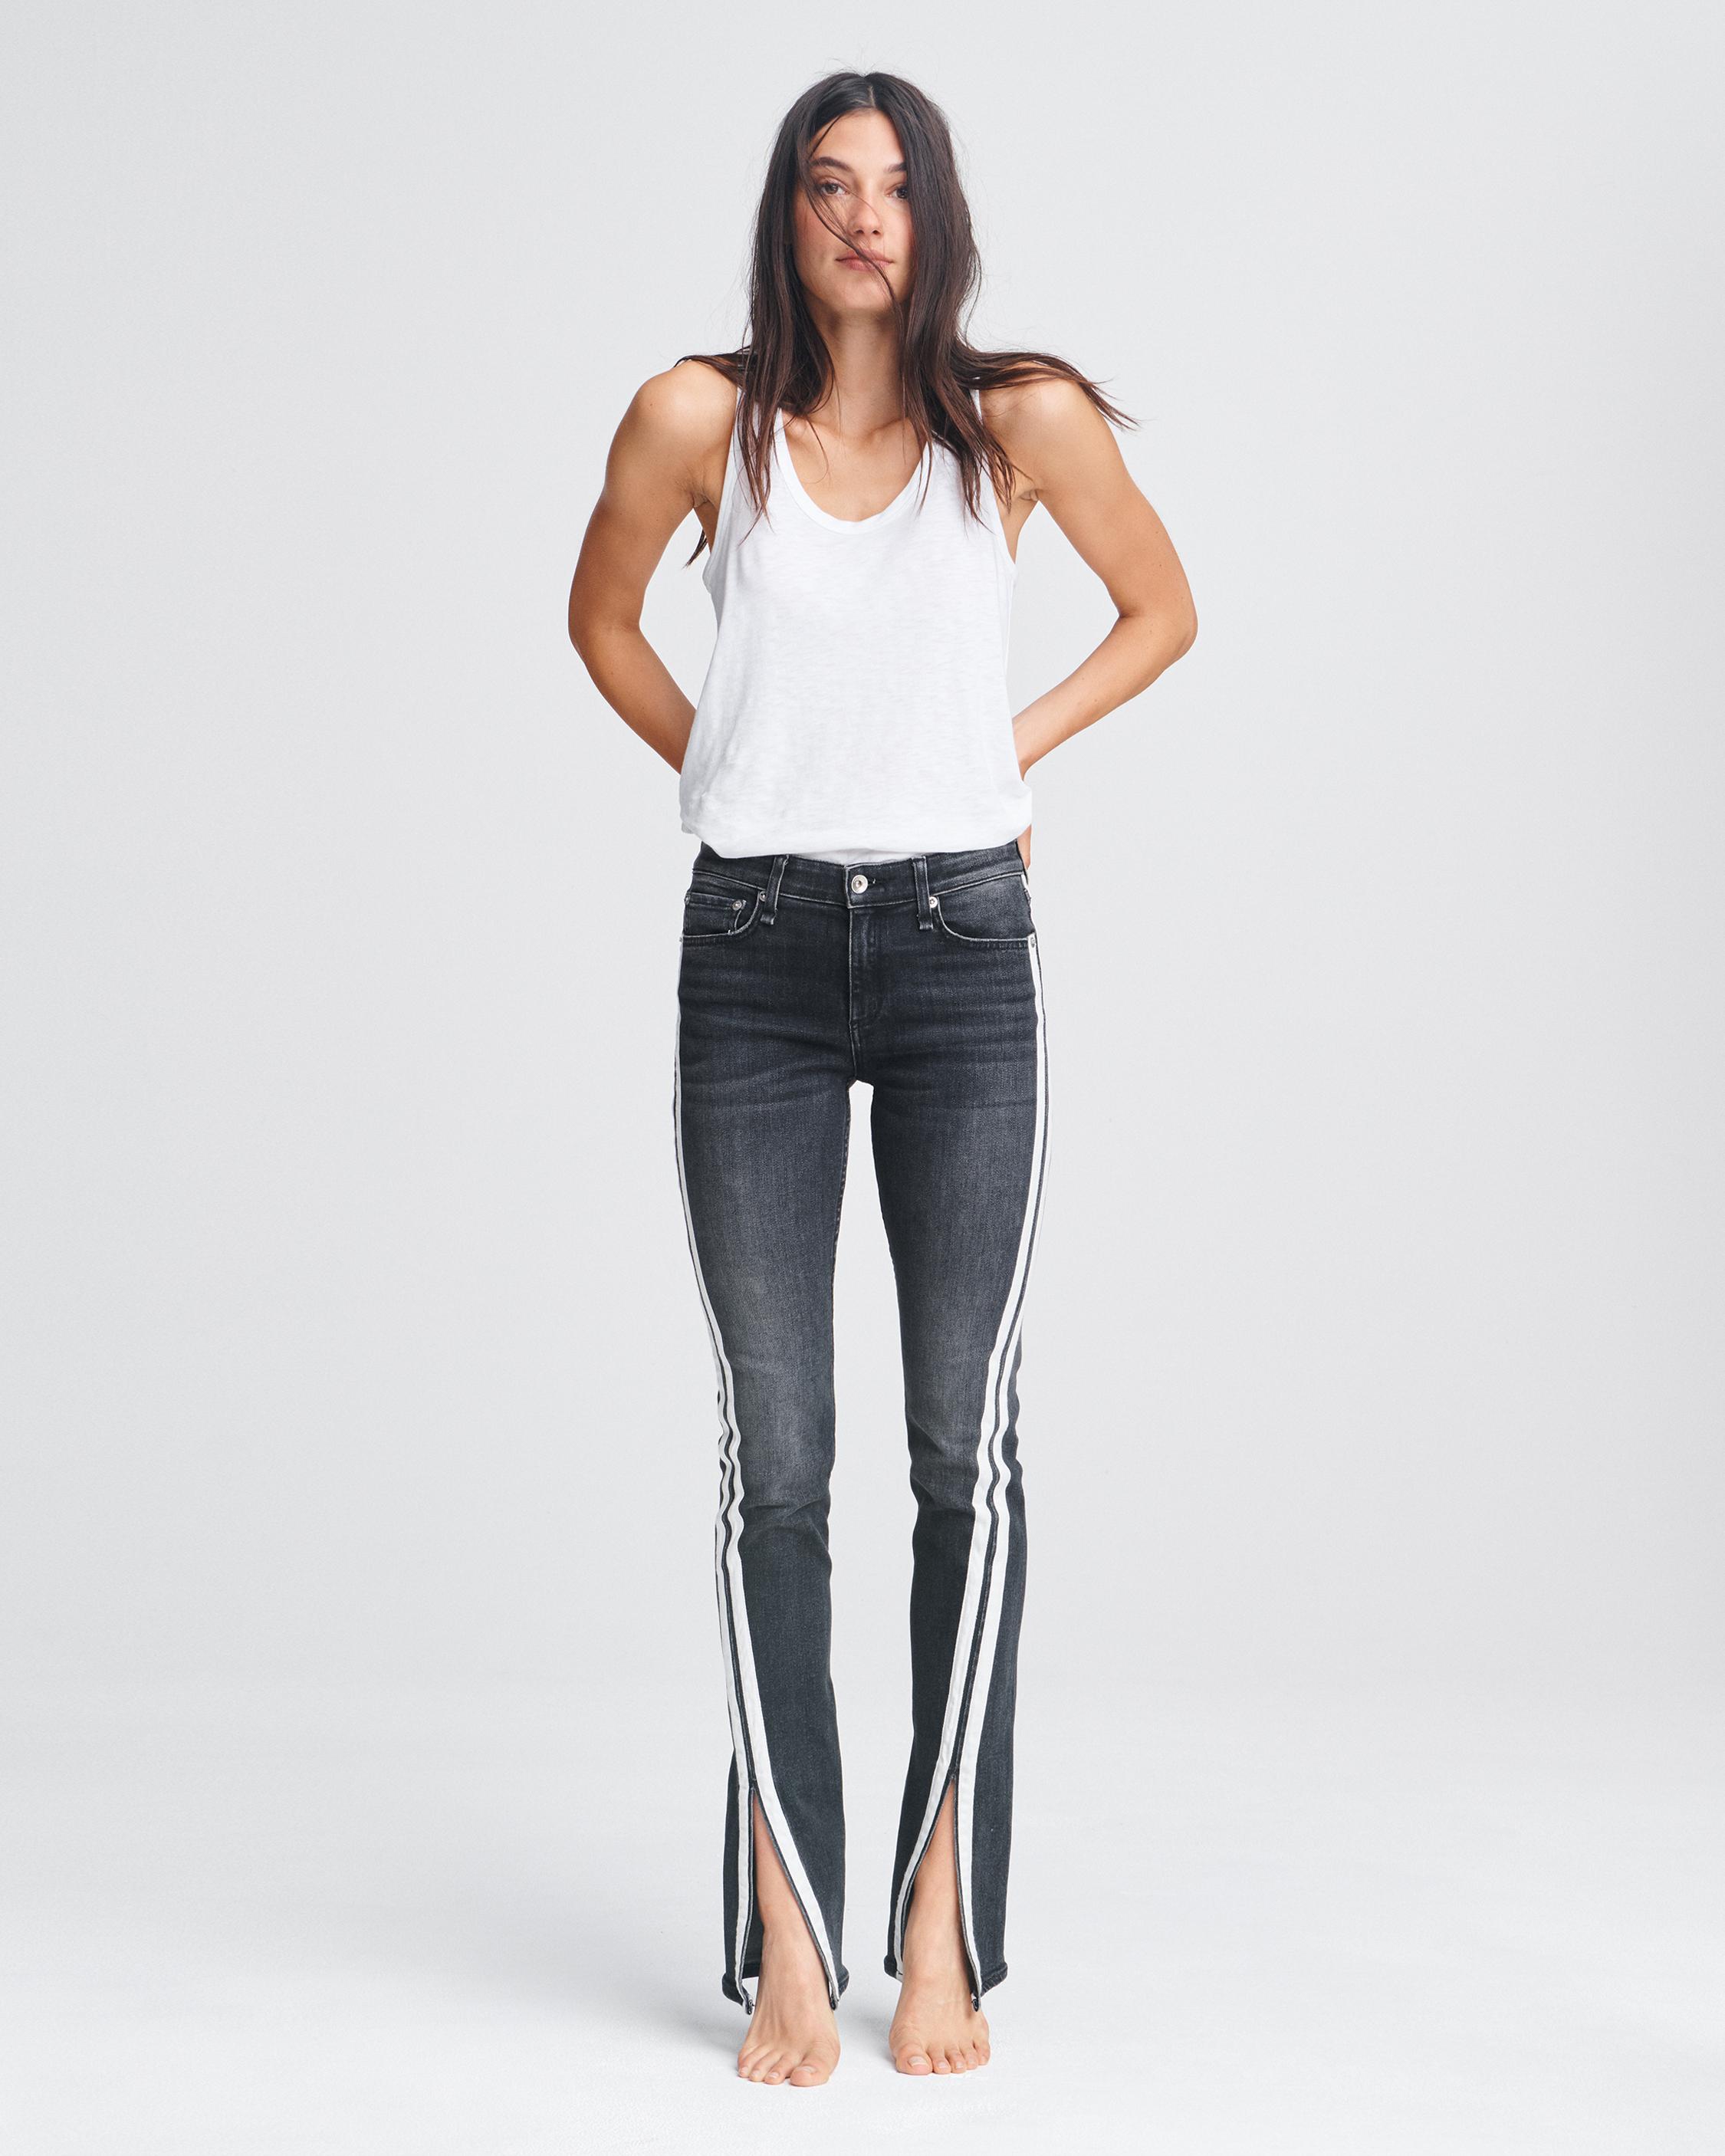 black and white striped flare jeans